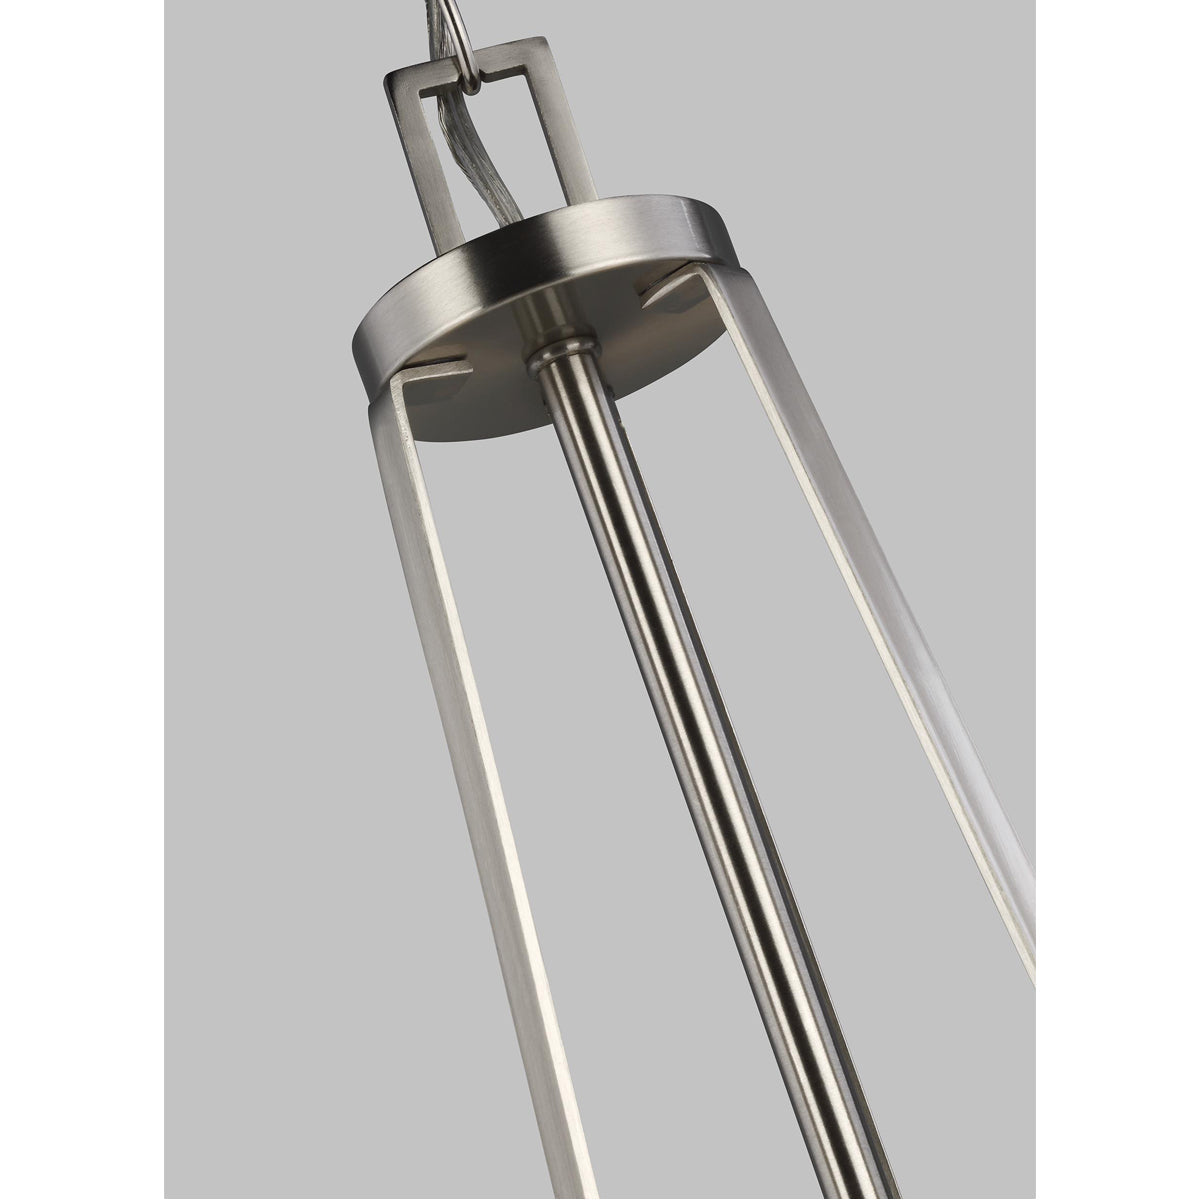 Sea Gull Lighting Robie 3-Light Chandelier without Bulb